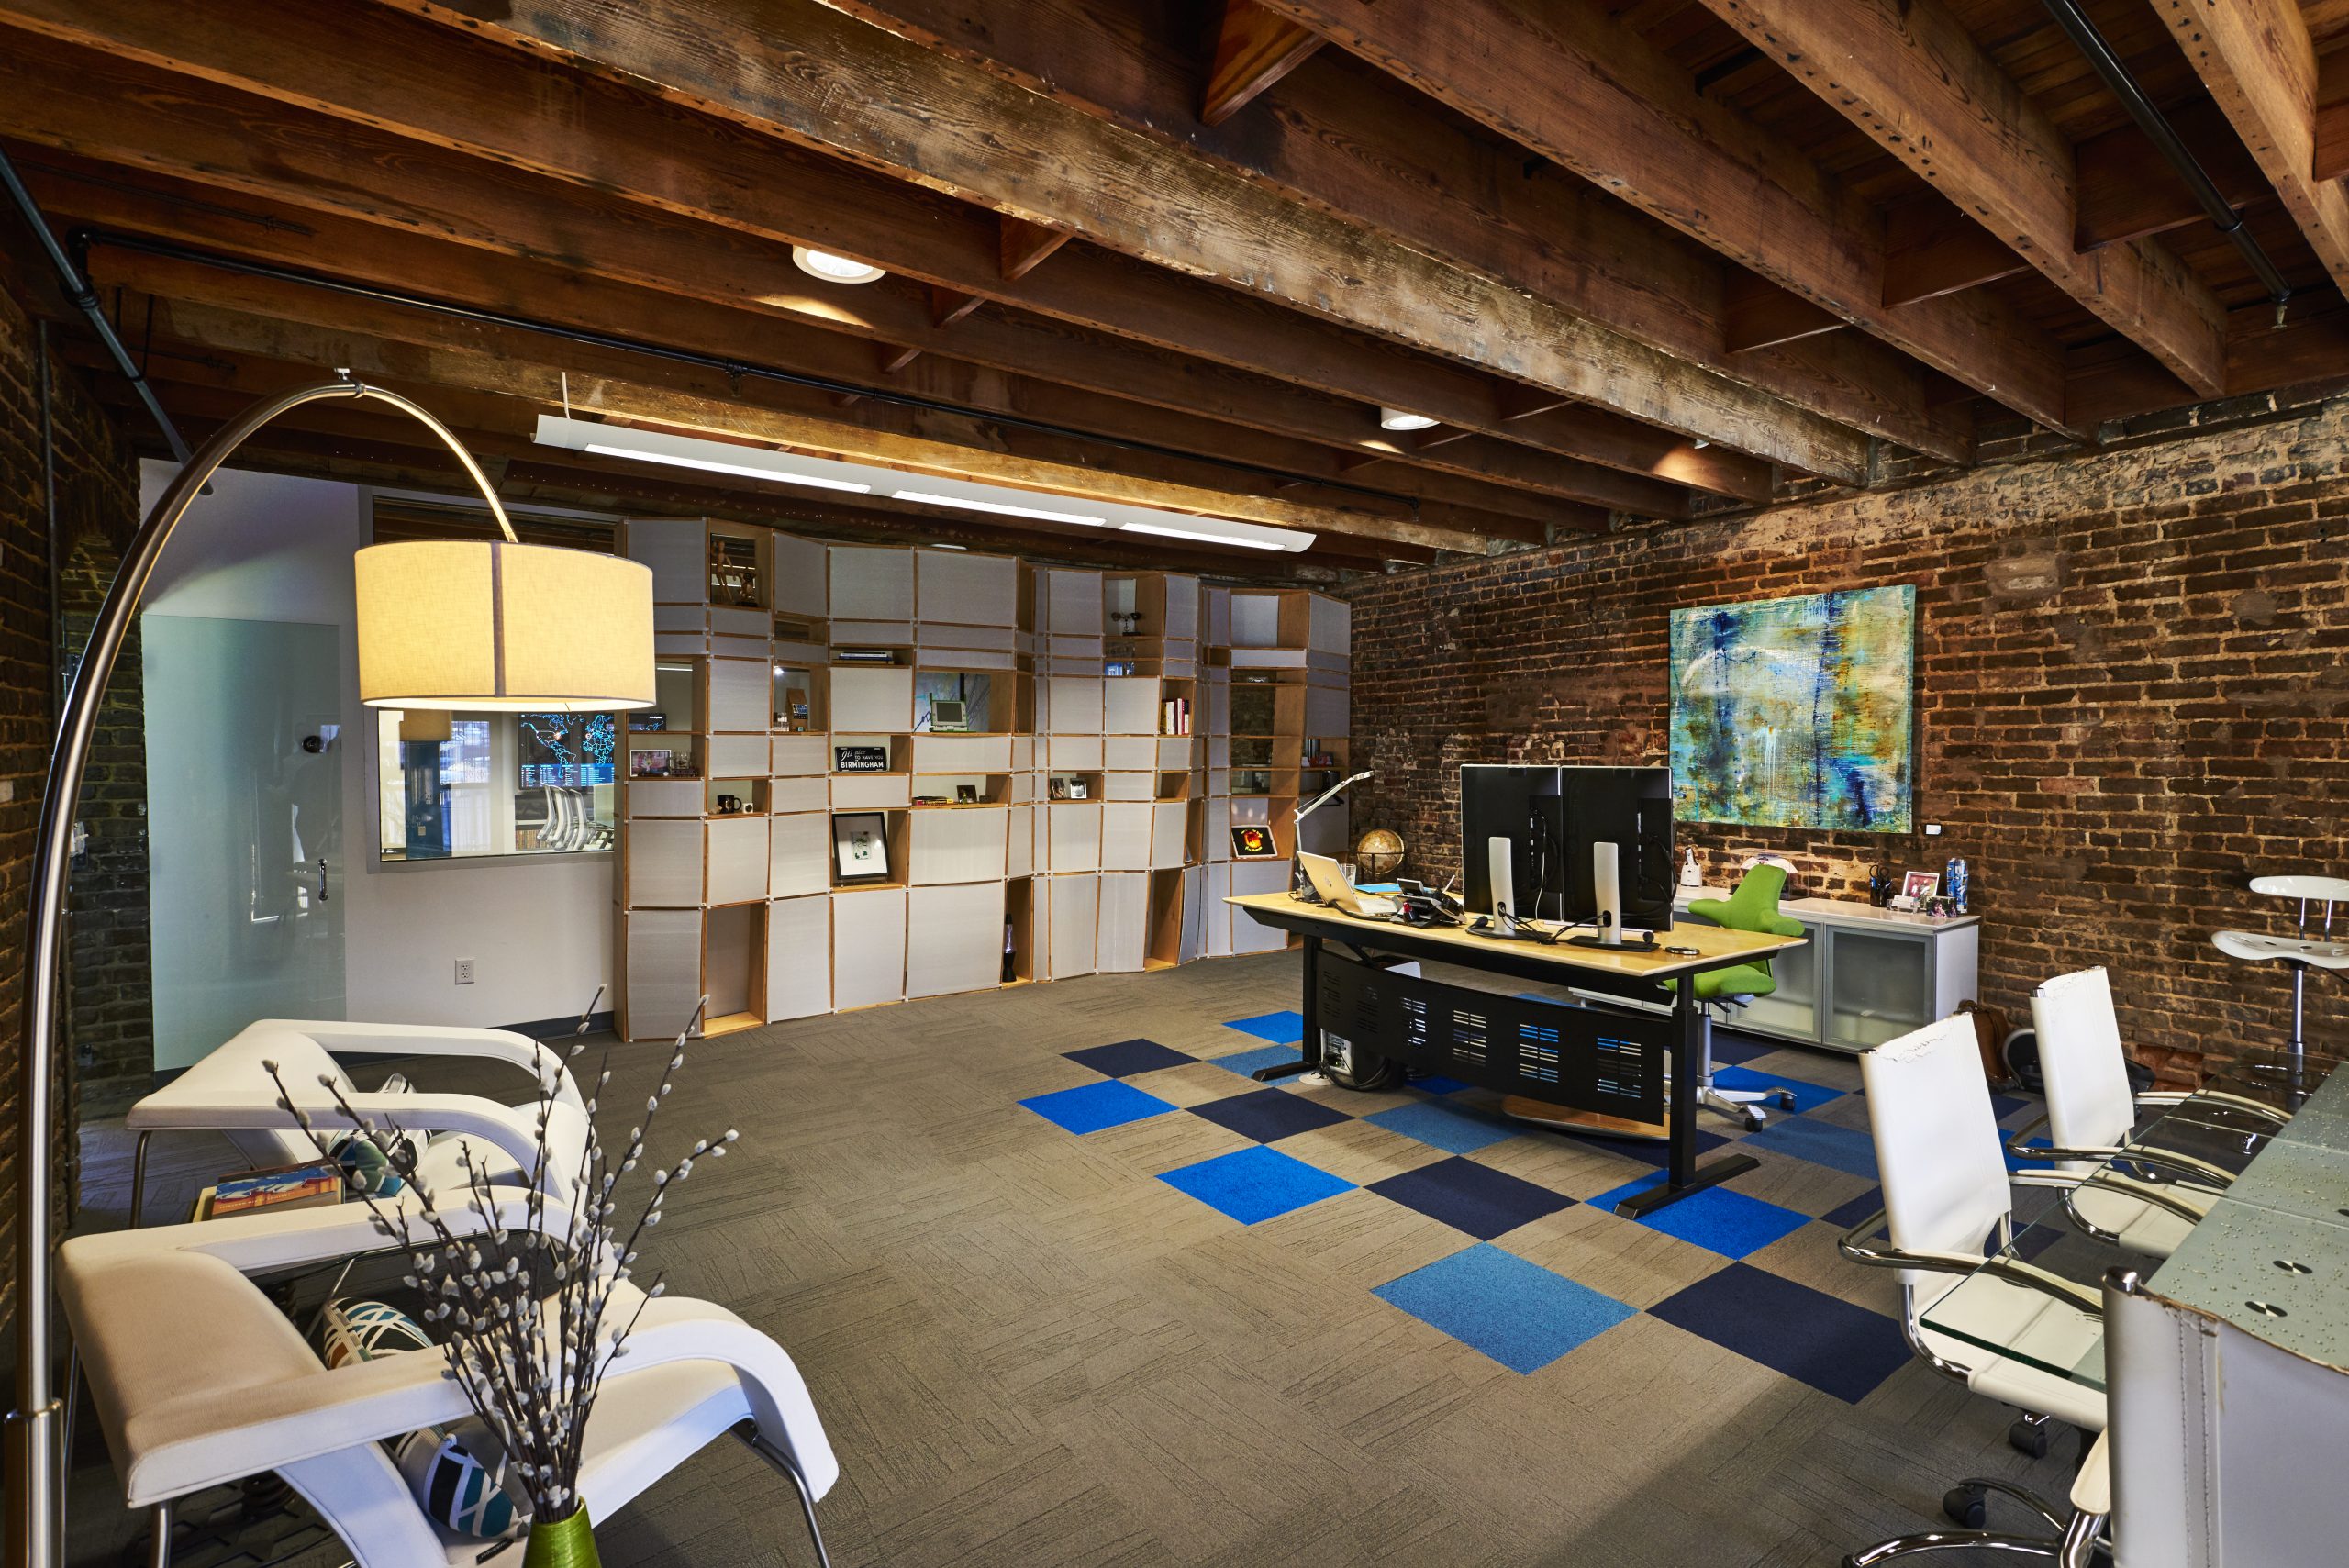 Photo of office defined by Kinetic's signature shelves and a portion of the floor featuring a carpeted section of alternating tiles of Kinetic's colors.